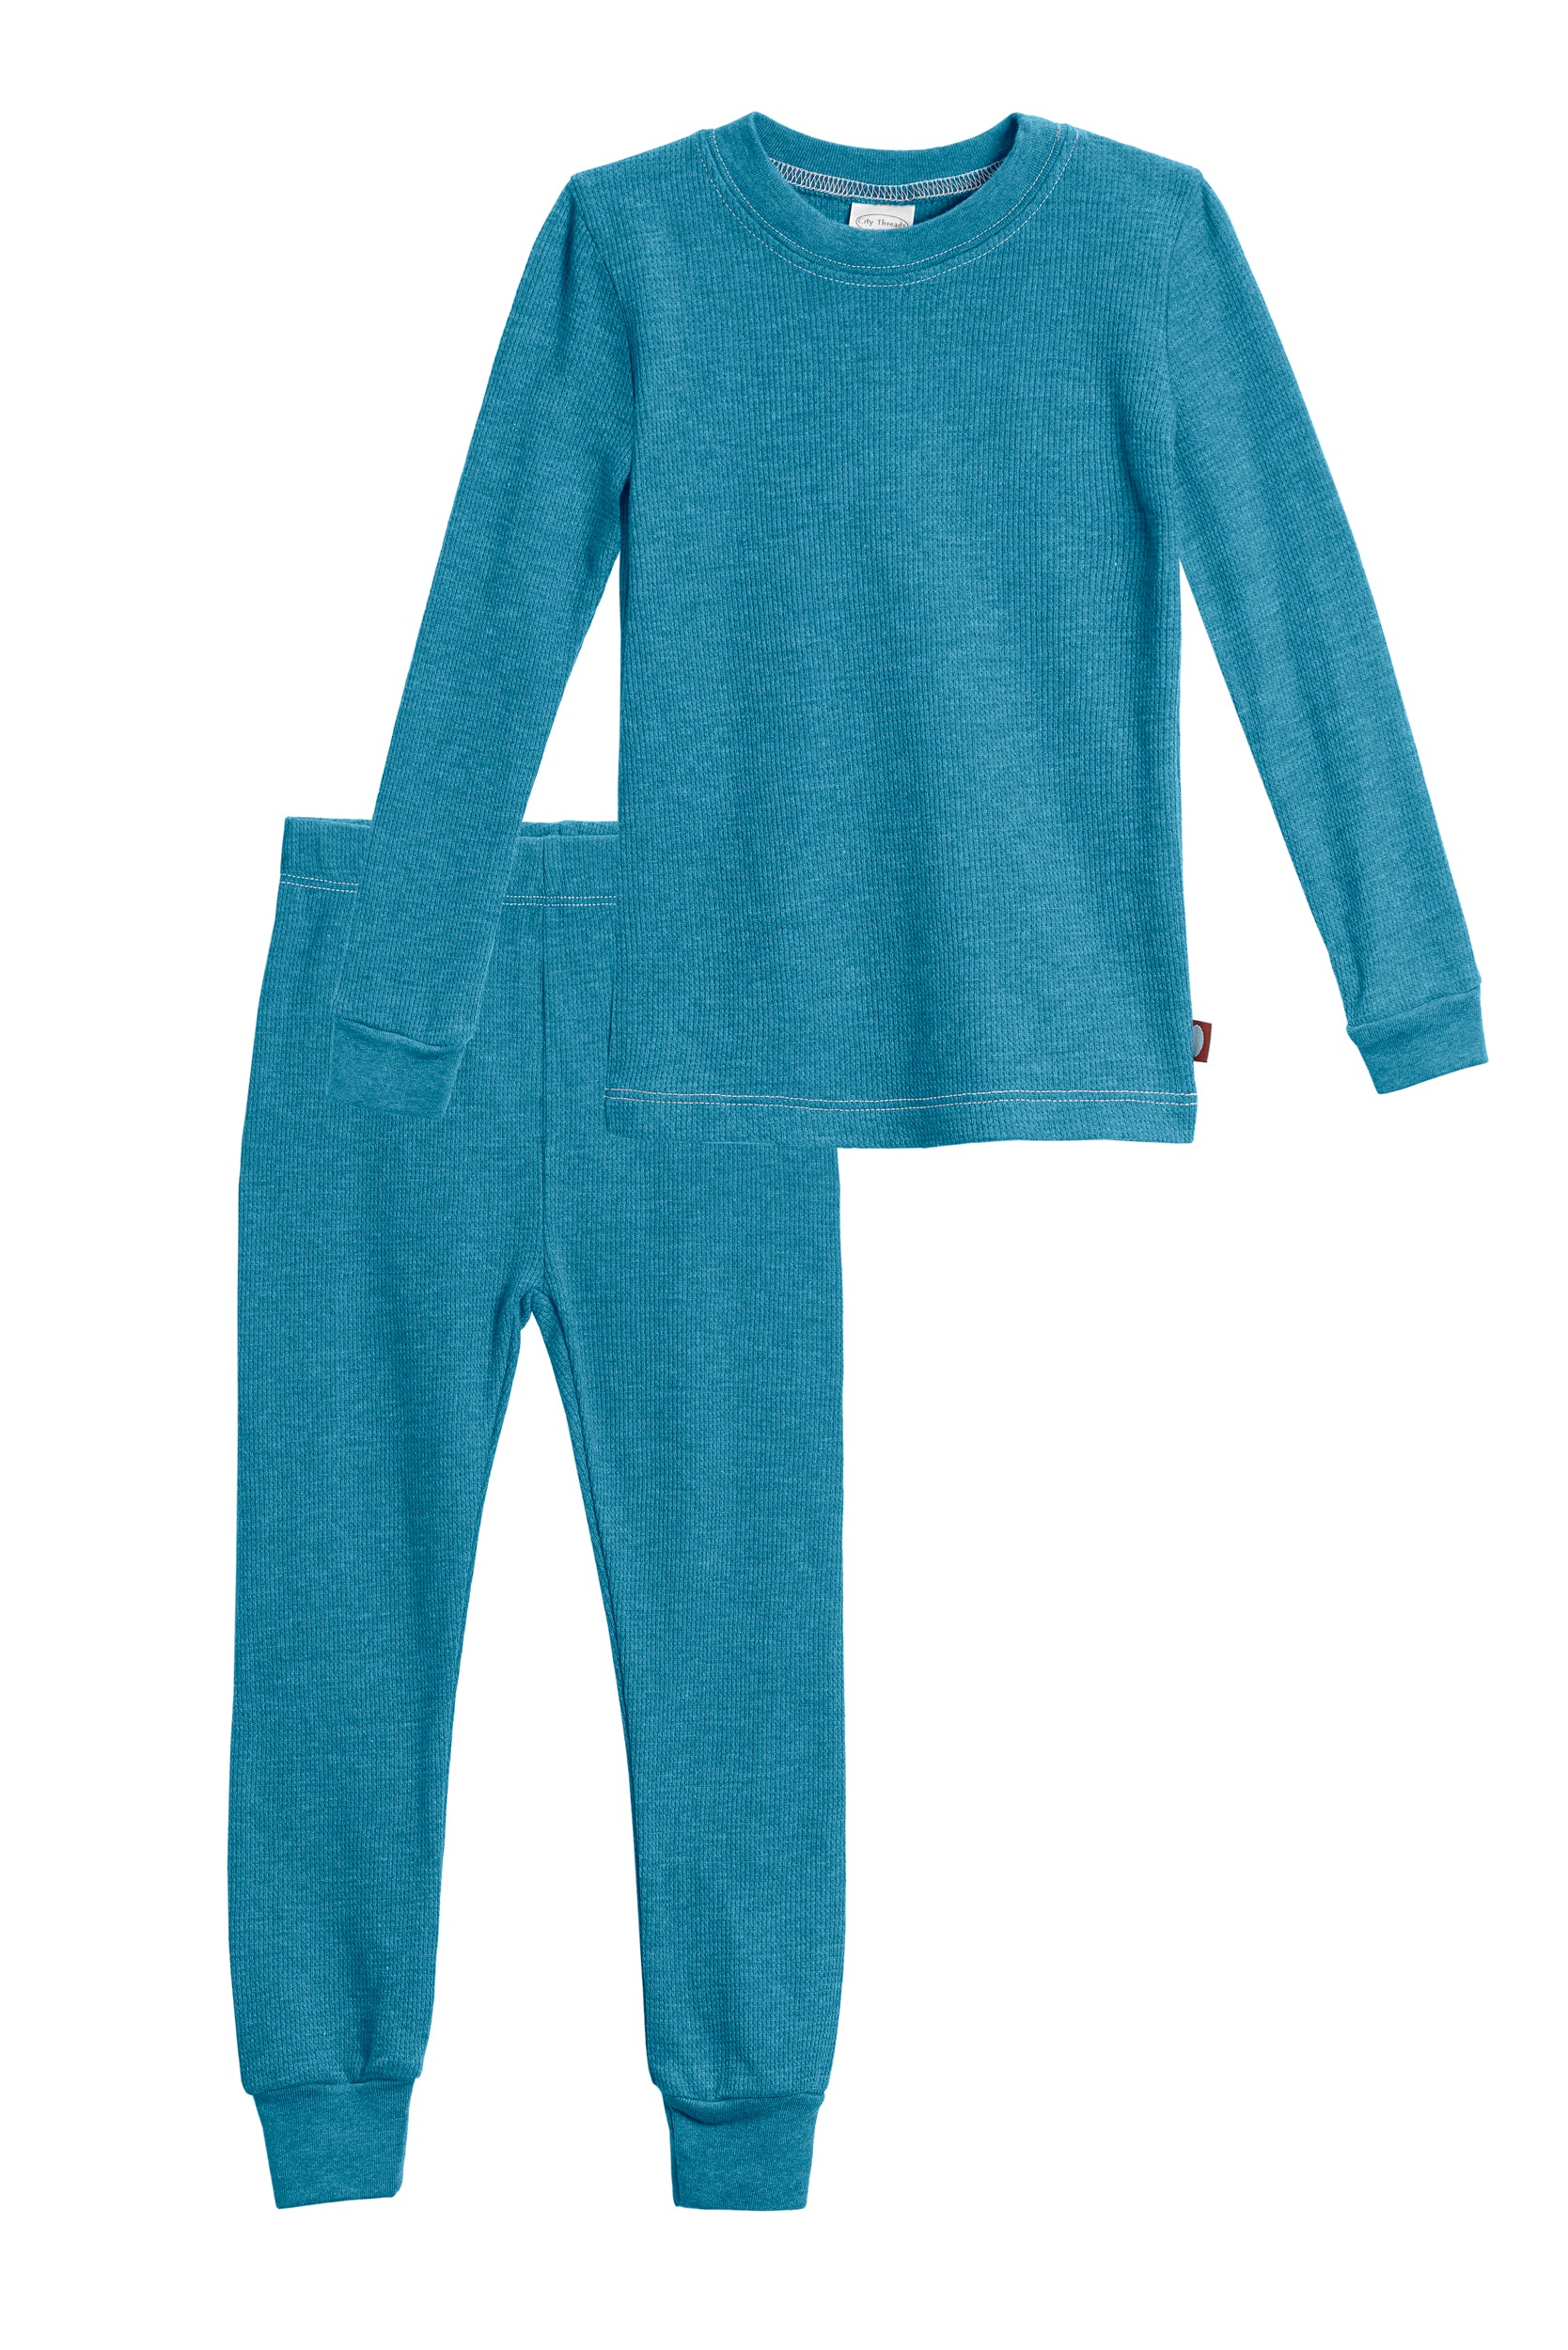 2017 Baby Girls Childrens Thermal Underwear Set Cotton Long Sleeved Pajamas  For Boys And Girls, Warm And Cozy Outfit From Powertoy, $14.28